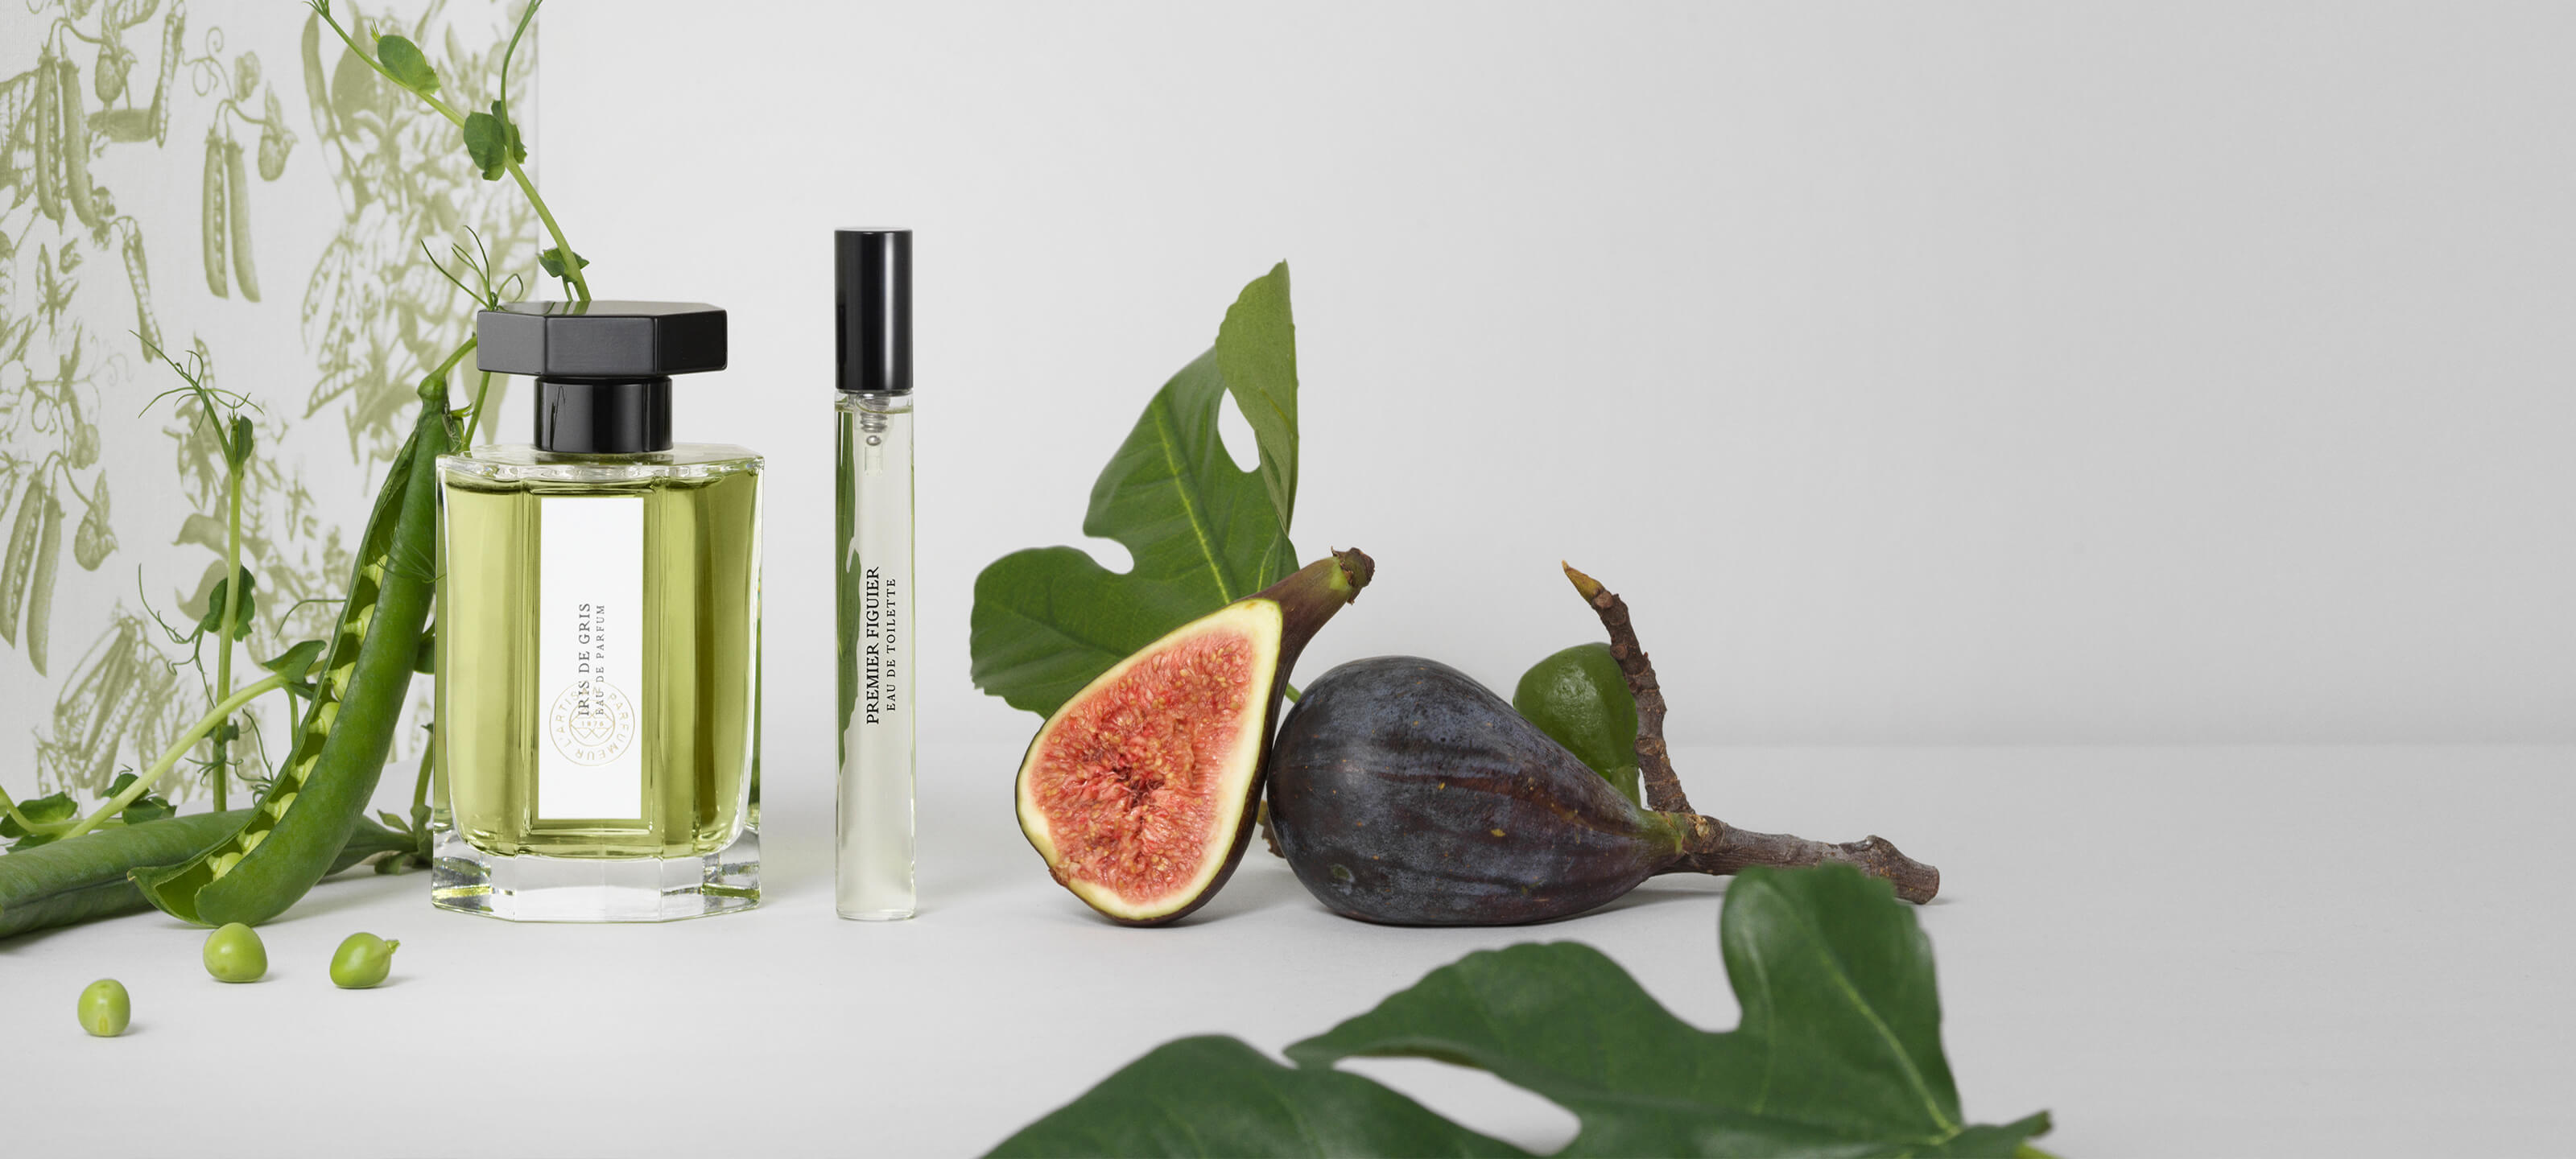 Personalise your Le Potager fragrance